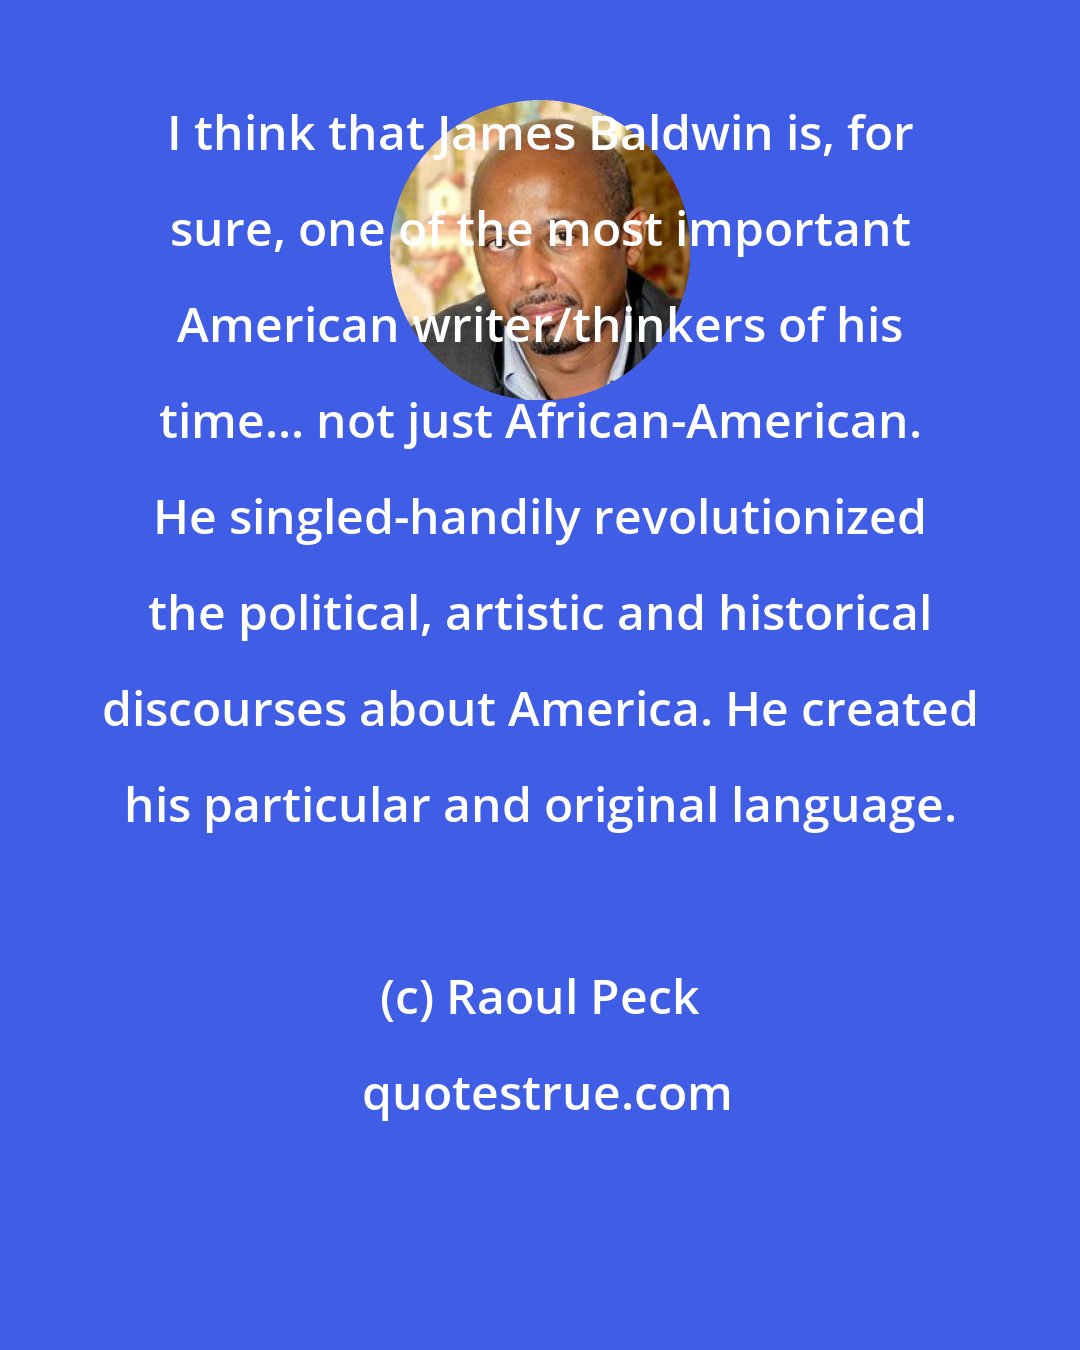 Raoul Peck: I think that James Baldwin is, for sure, one of the most important American writer/thinkers of his time... not just African-American. He singled-handily revolutionized the political, artistic and historical discourses about America. He created his particular and original language.